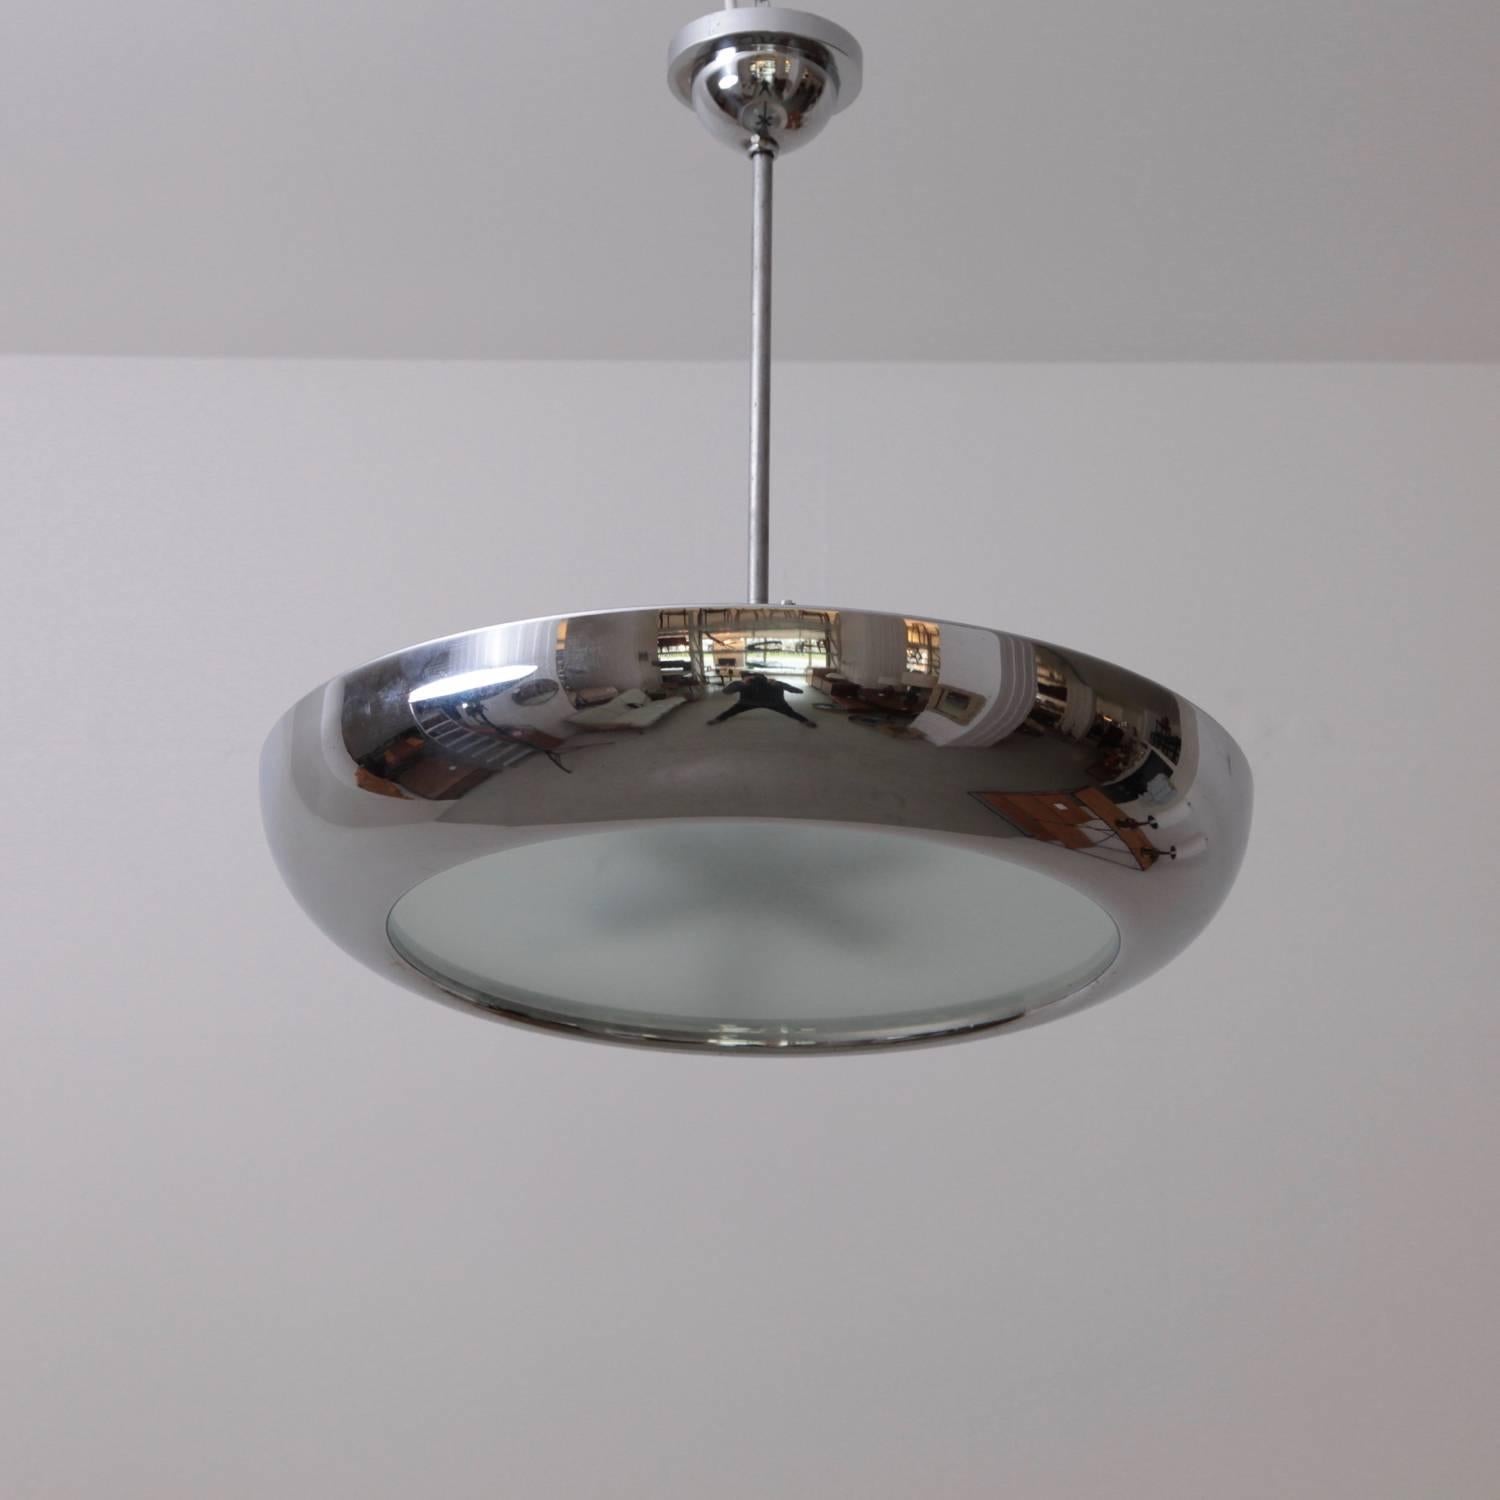 Czech 1930s Chrome and Glass Pendant Lamp by Josef Hurka for Napako, 1 of 2